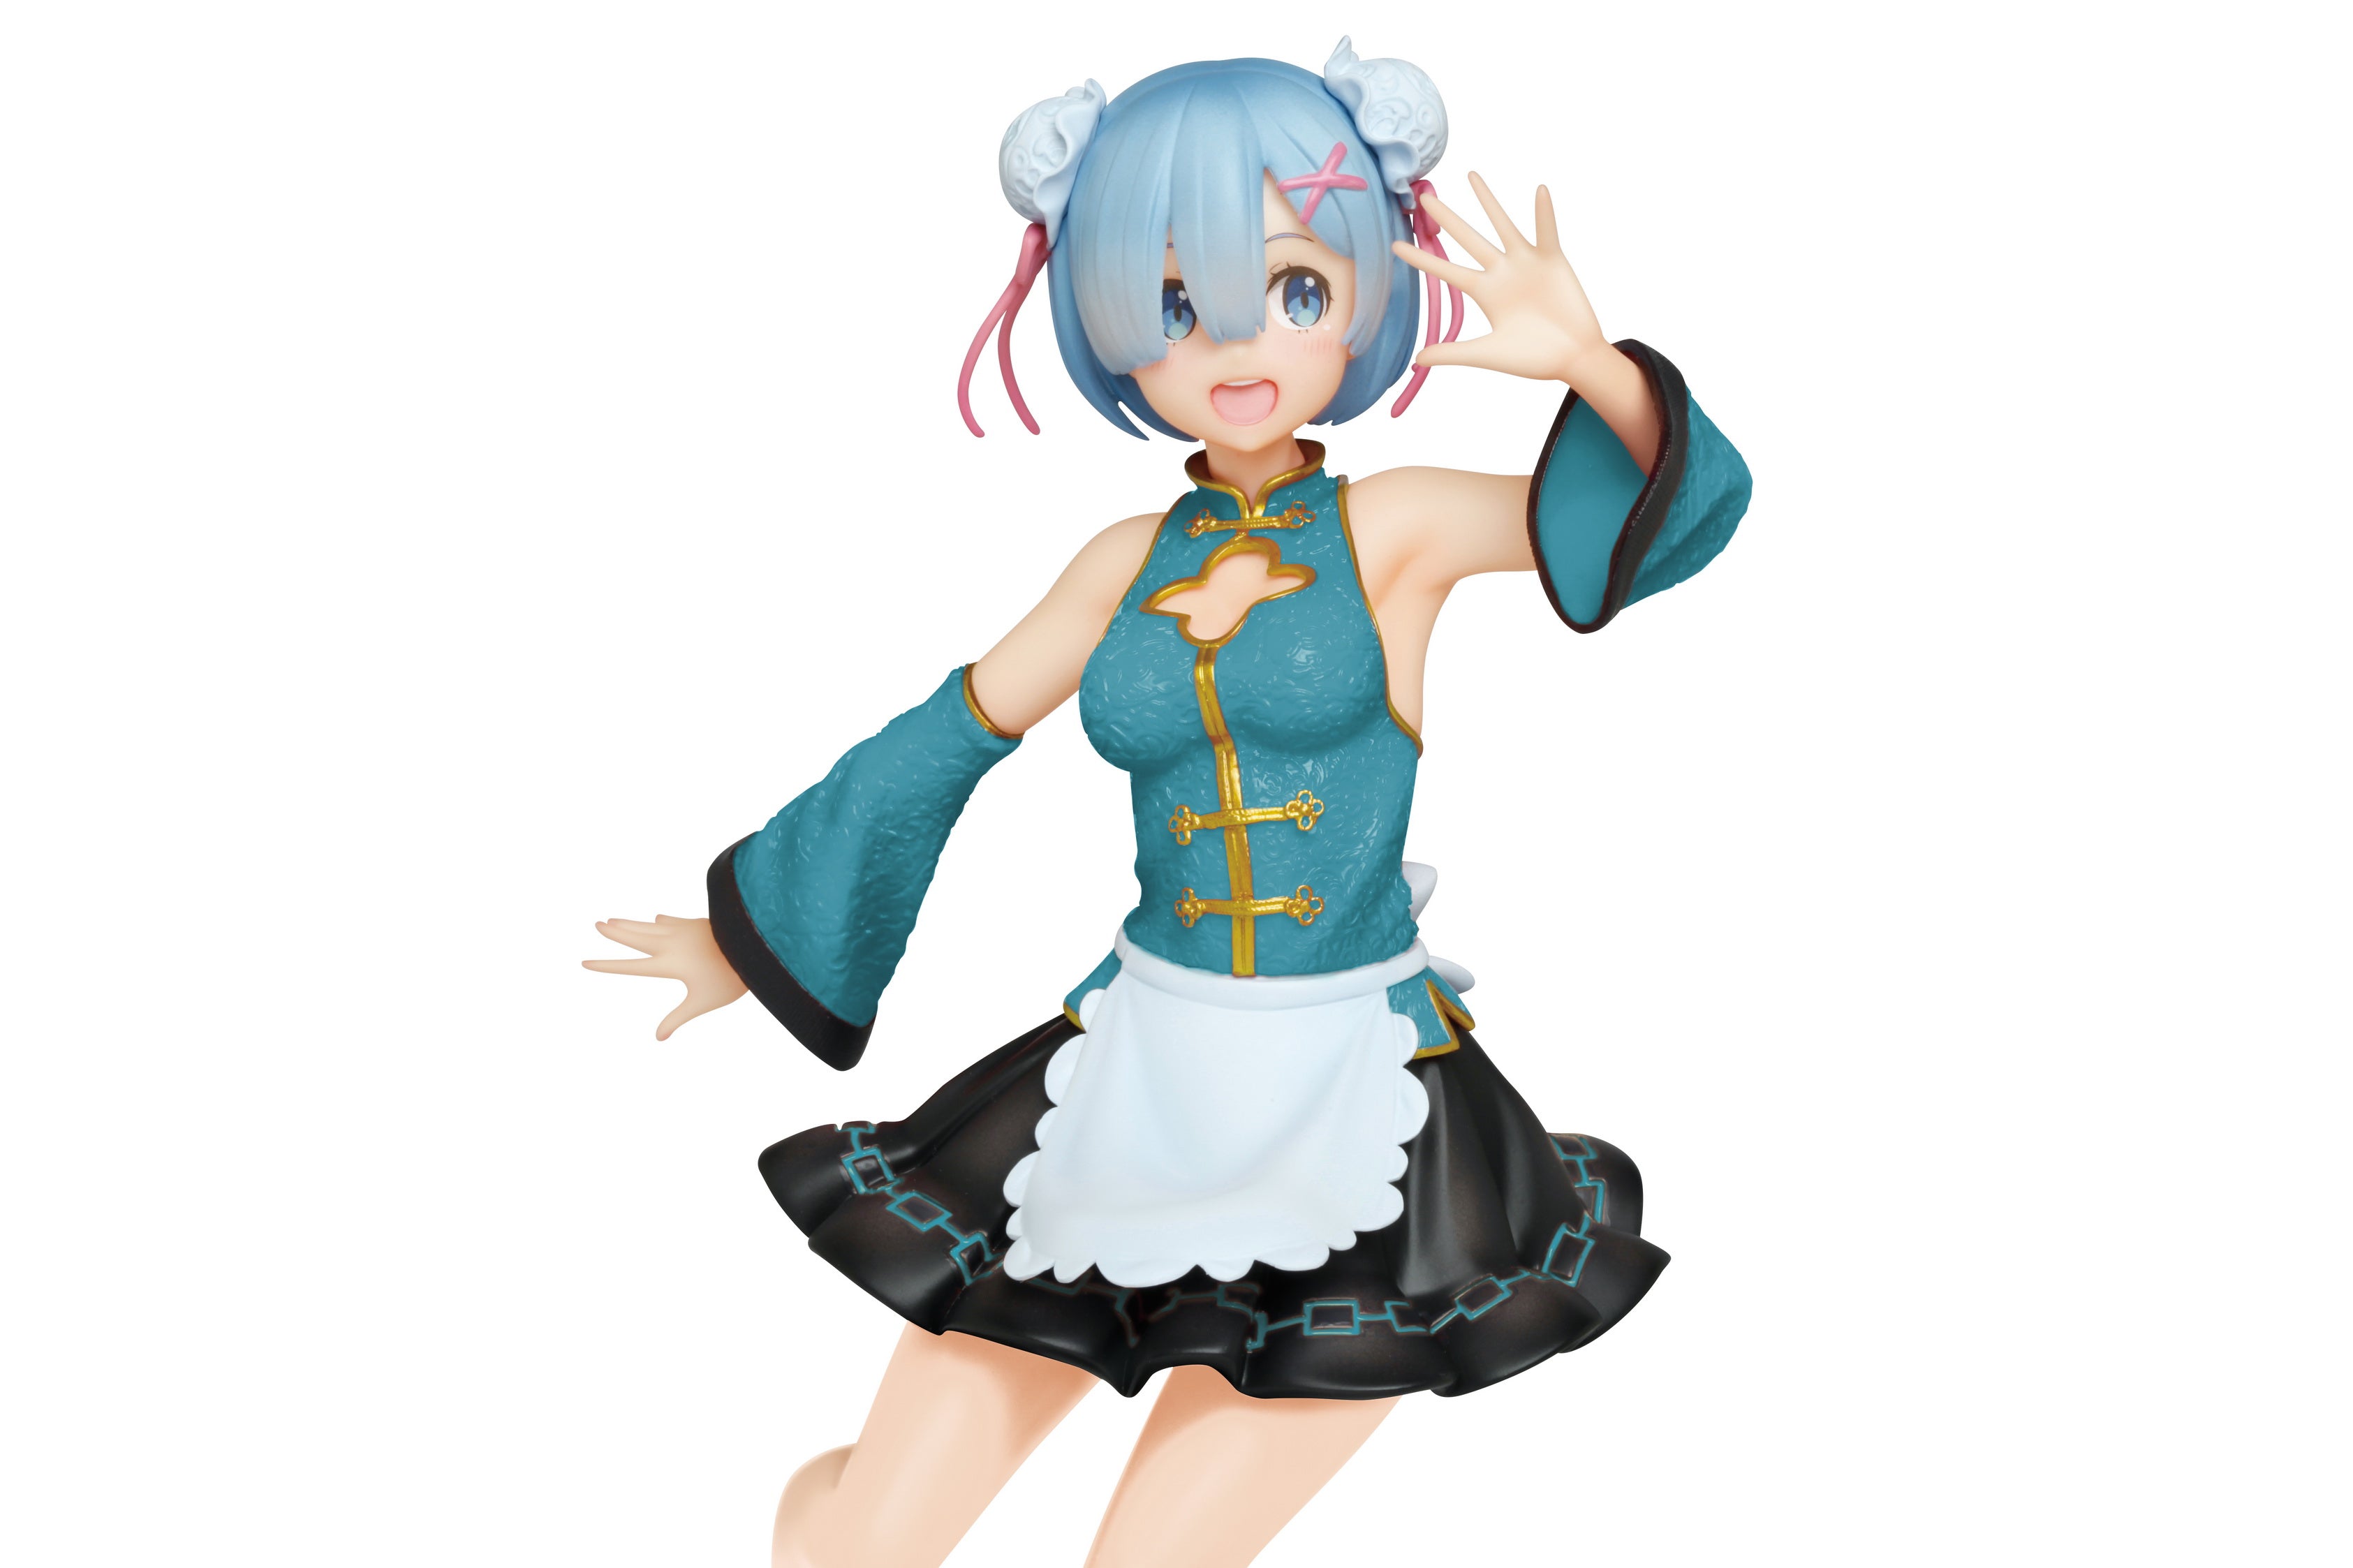 PRE-ORDER Re:ZERO -Starting Life in Another World Precious Figure - Rem: Mandarin Maid Renewal Ver.